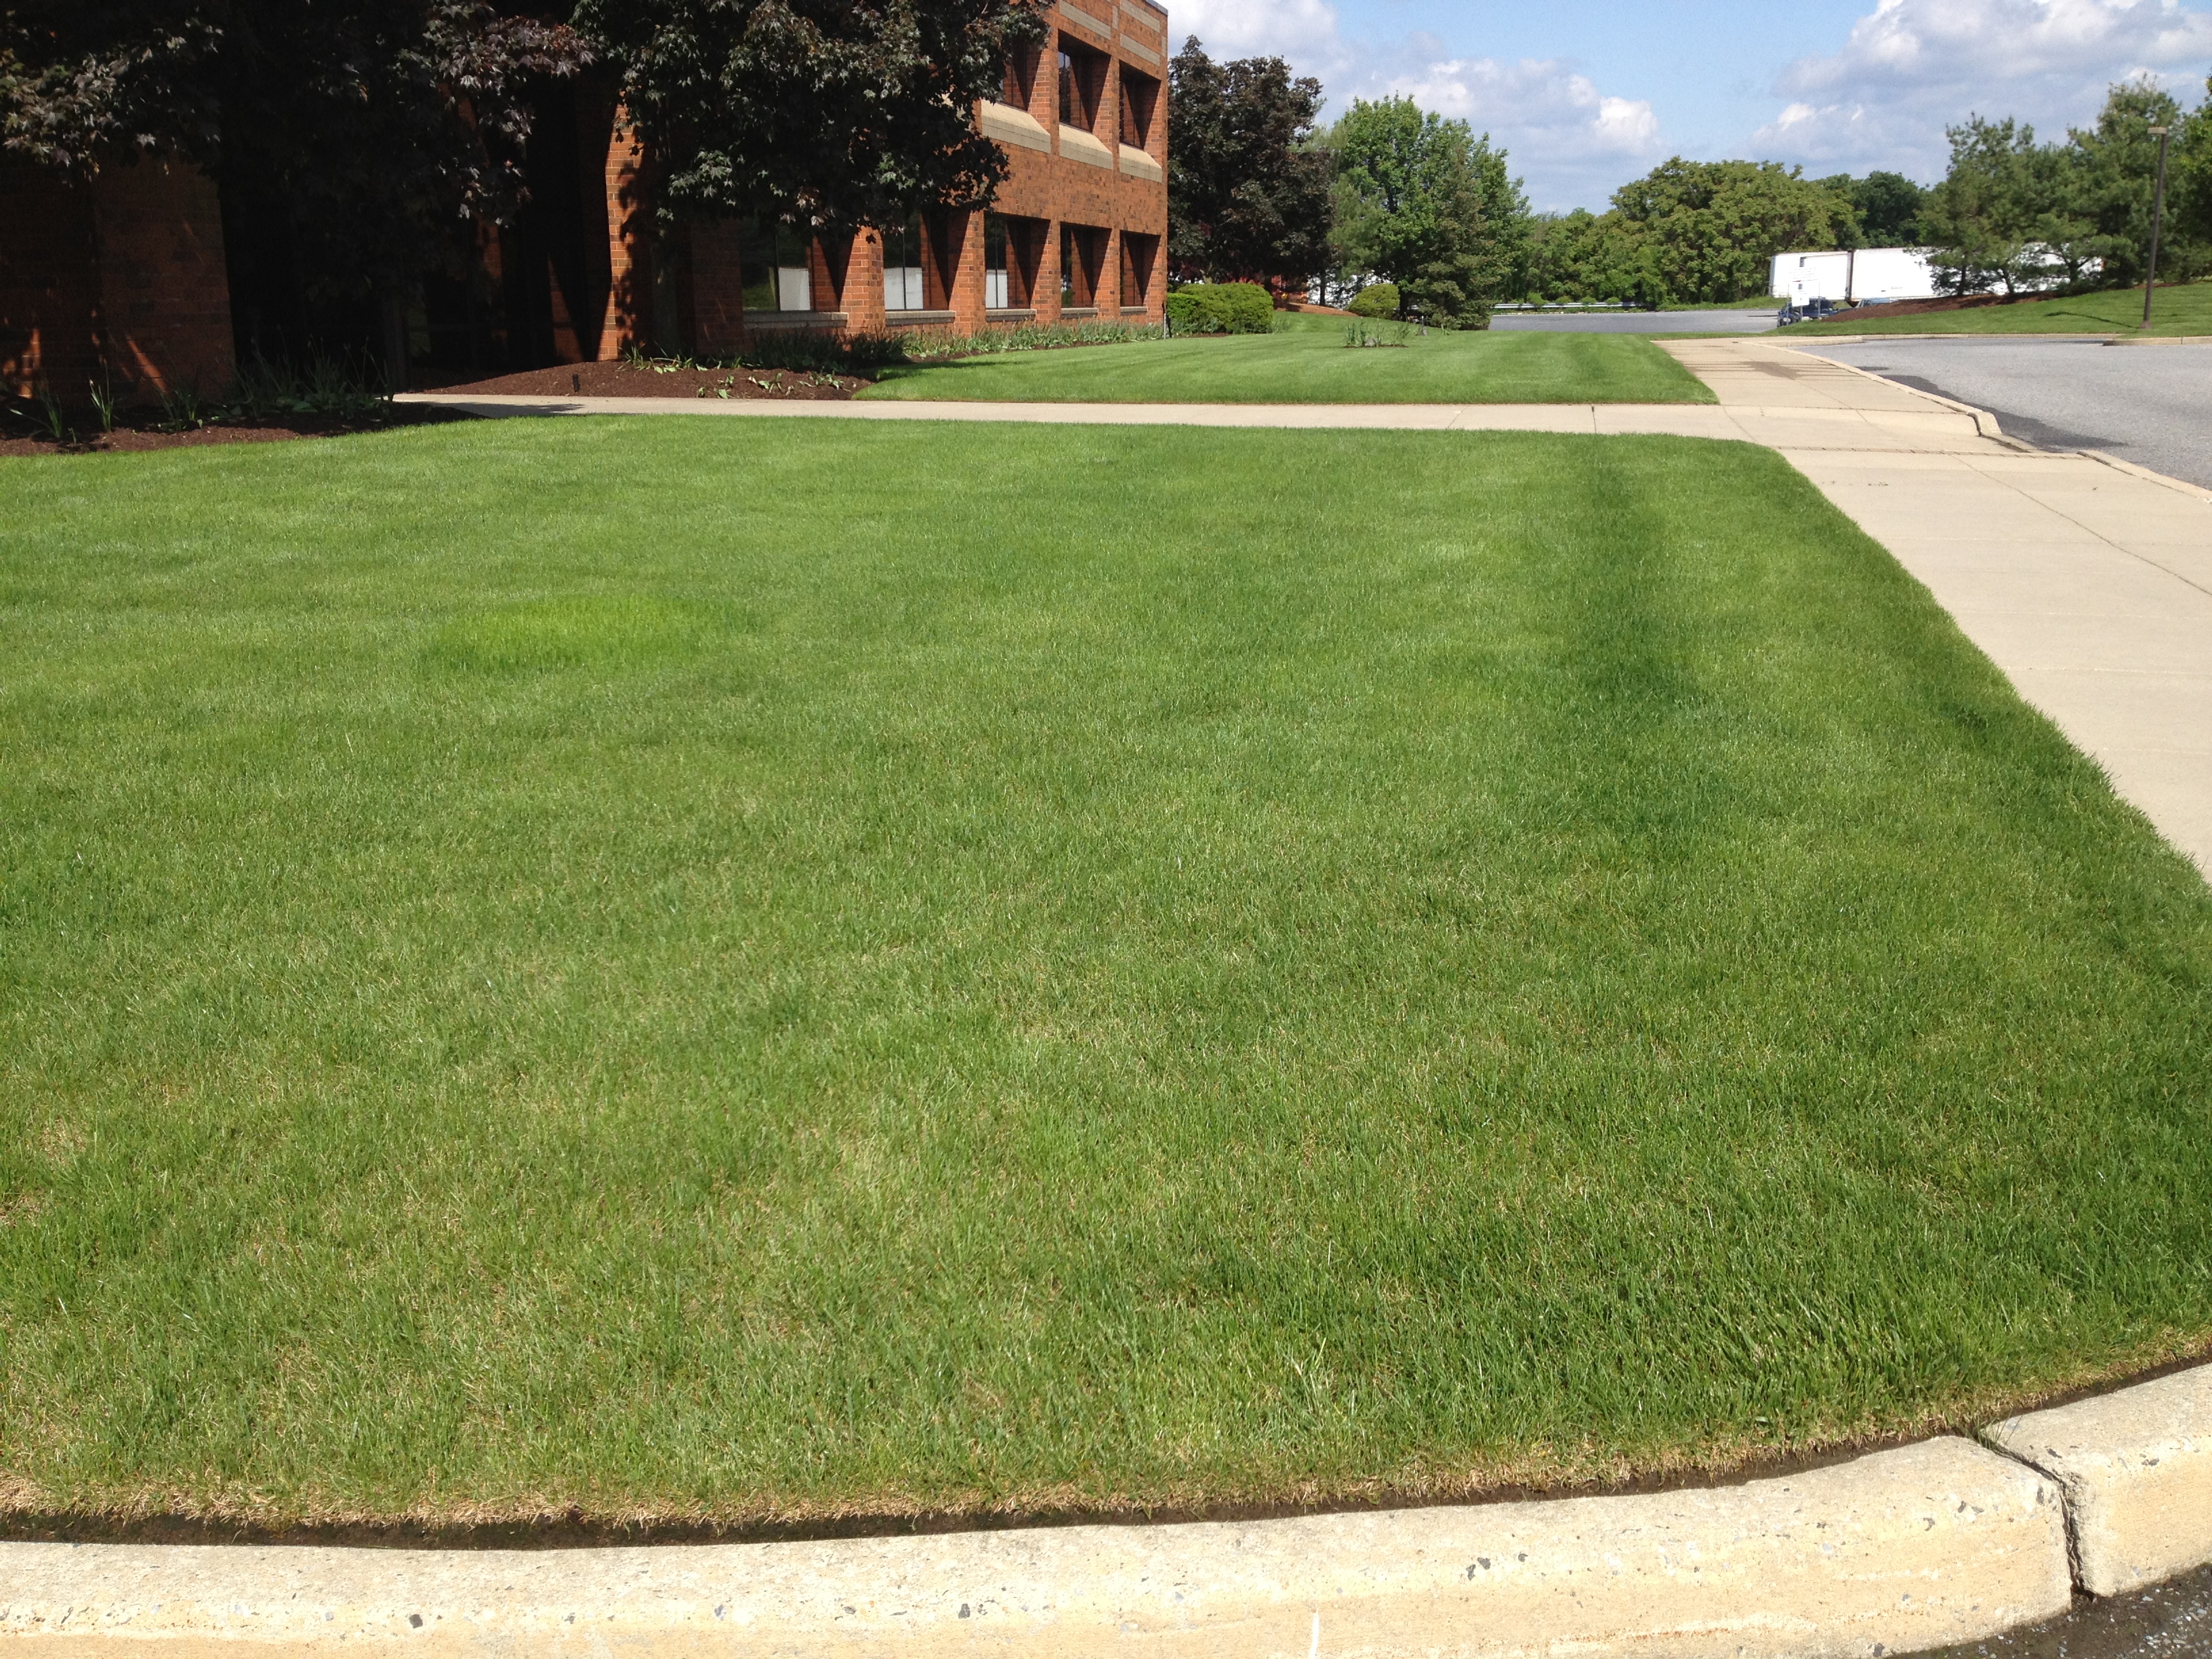 This album shows some photos of the lawns we treat in your area.